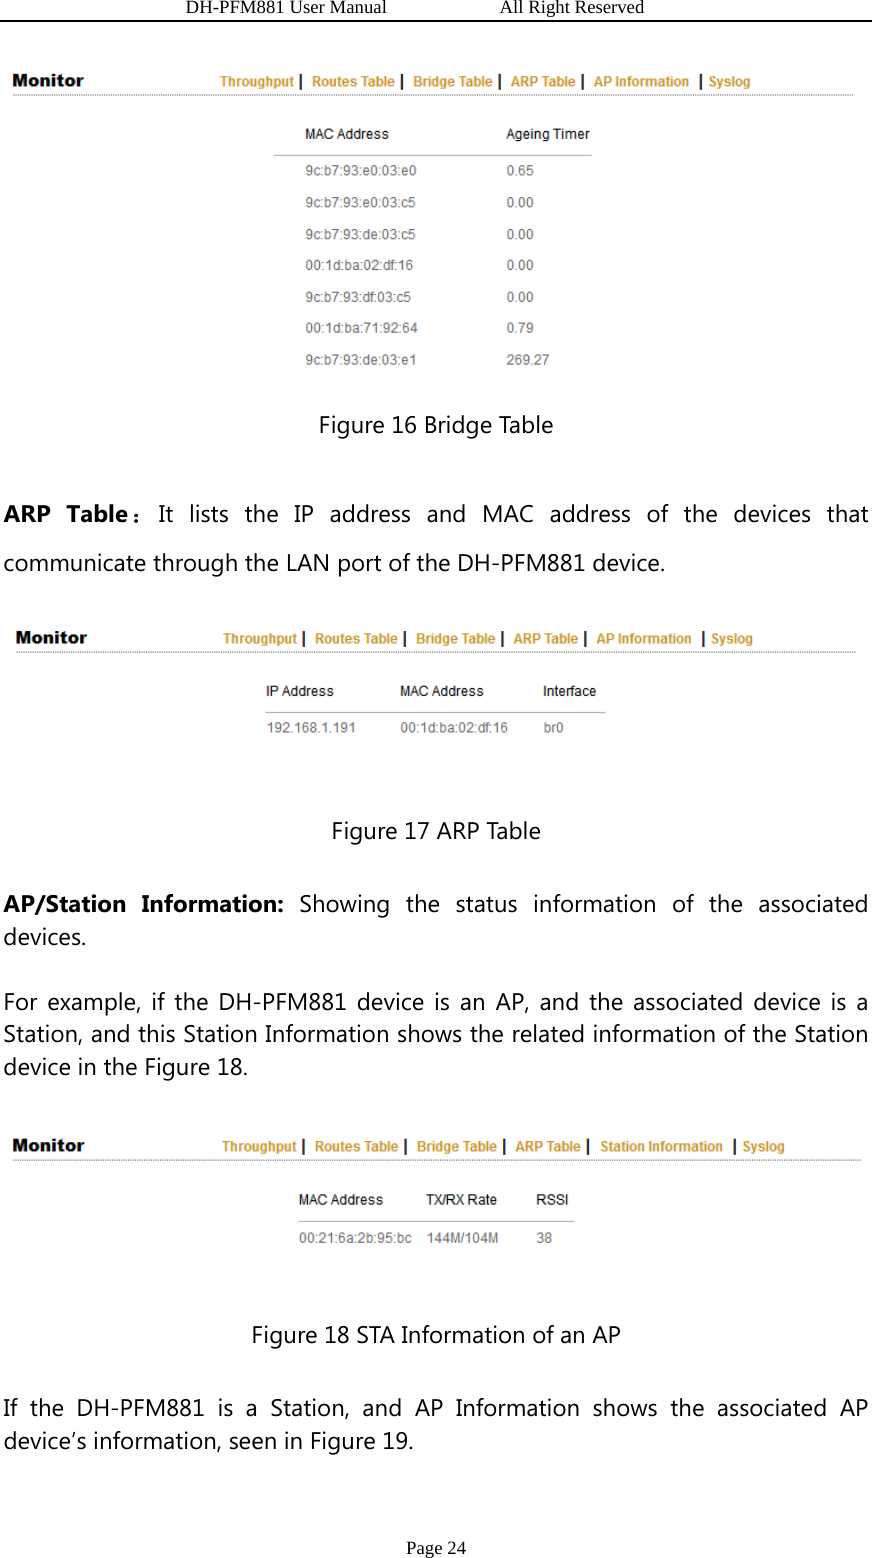                   DH-PFM881 User Manual            All Right Reserved Page 24  Figure 16 Bridge Table ARP Table ：It lists the IP address and MAC address of the devices that communicate through the LAN port of the DH-PFM881 device.  Figure 17 ARP Table AP/Station Information: Showing the status information of the associated devices. For example, if the DH-PFM881 device is an AP, and the associated device is a Station, and this Station Information shows the related information of the Station device in the Figure 18.  Figure 18 STA Information of an AP If the DH-PFM881 is a Station, and AP Information shows the associated AP device’s information, seen in Figure 19. 